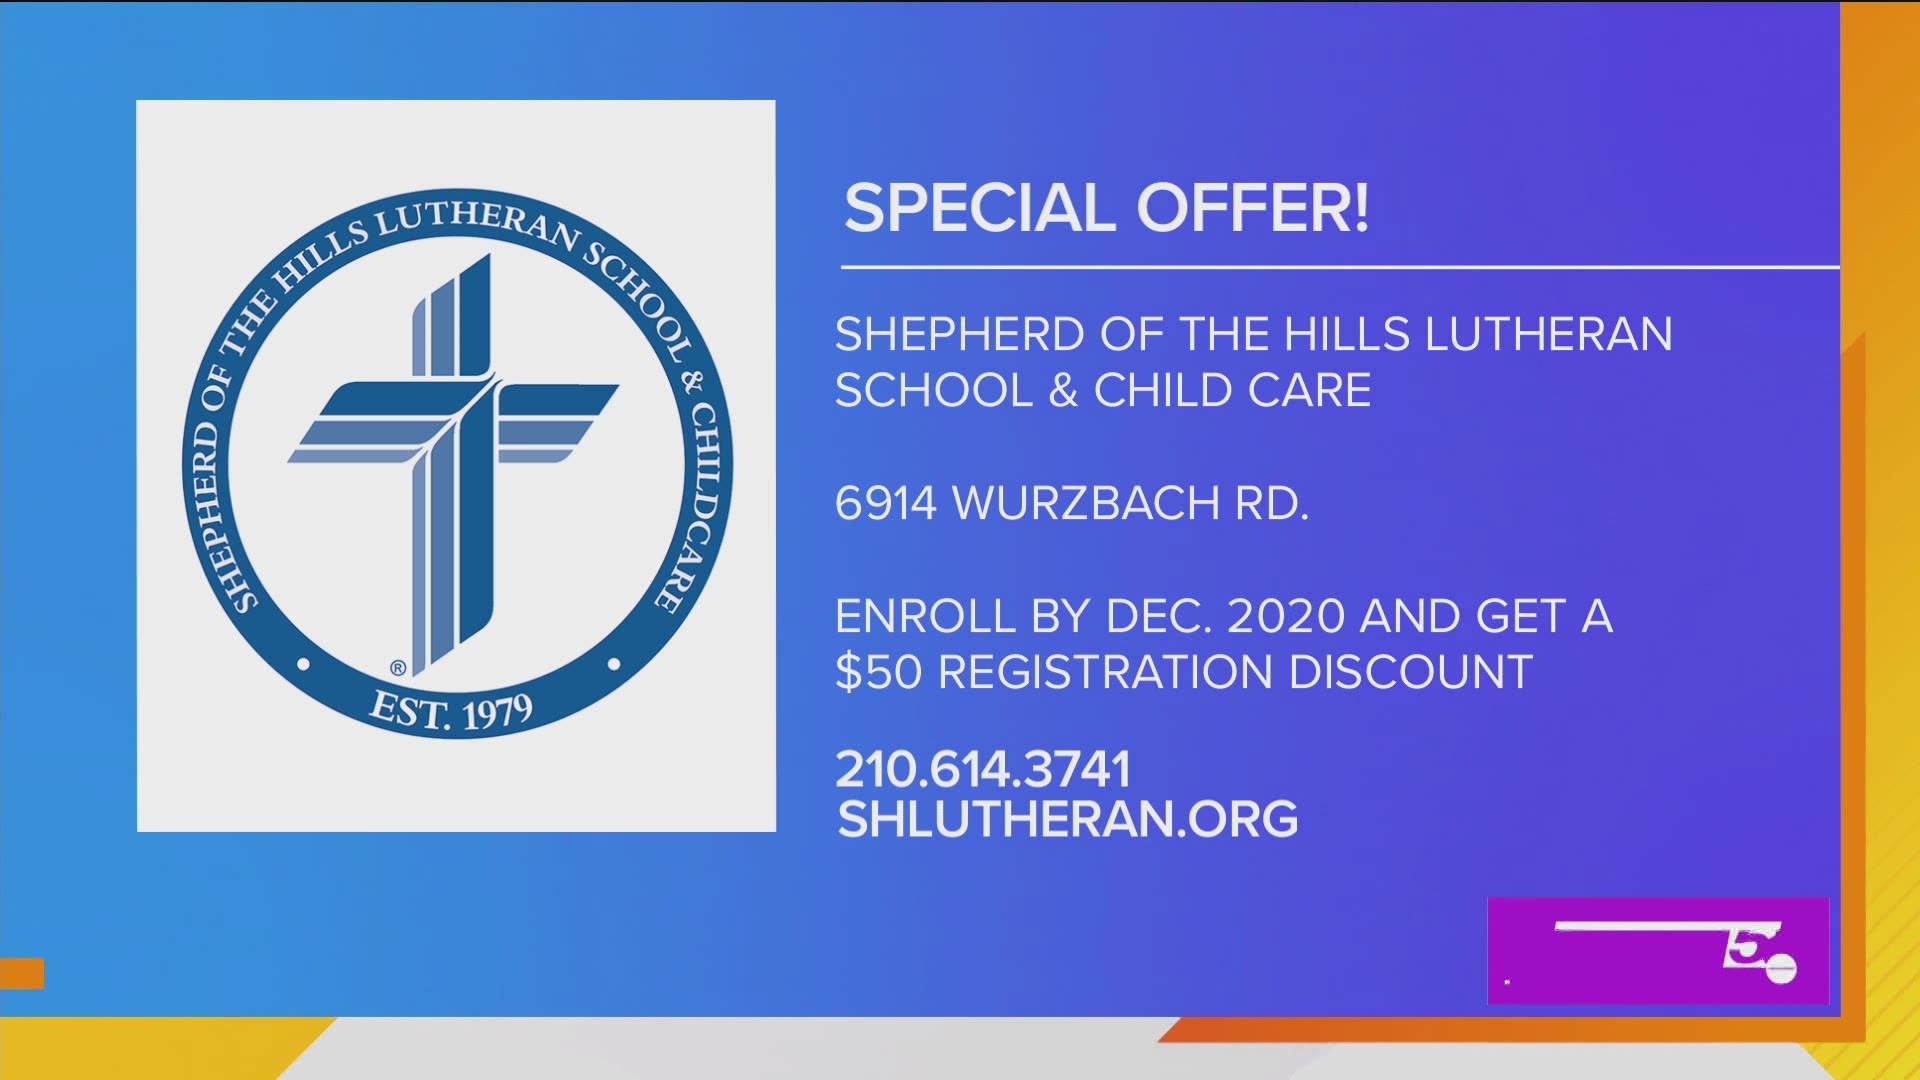 Shepherd of the Hills Lutheran School is open for enrollment. A representative shares more about their childcare program and accredited schooling program as well.